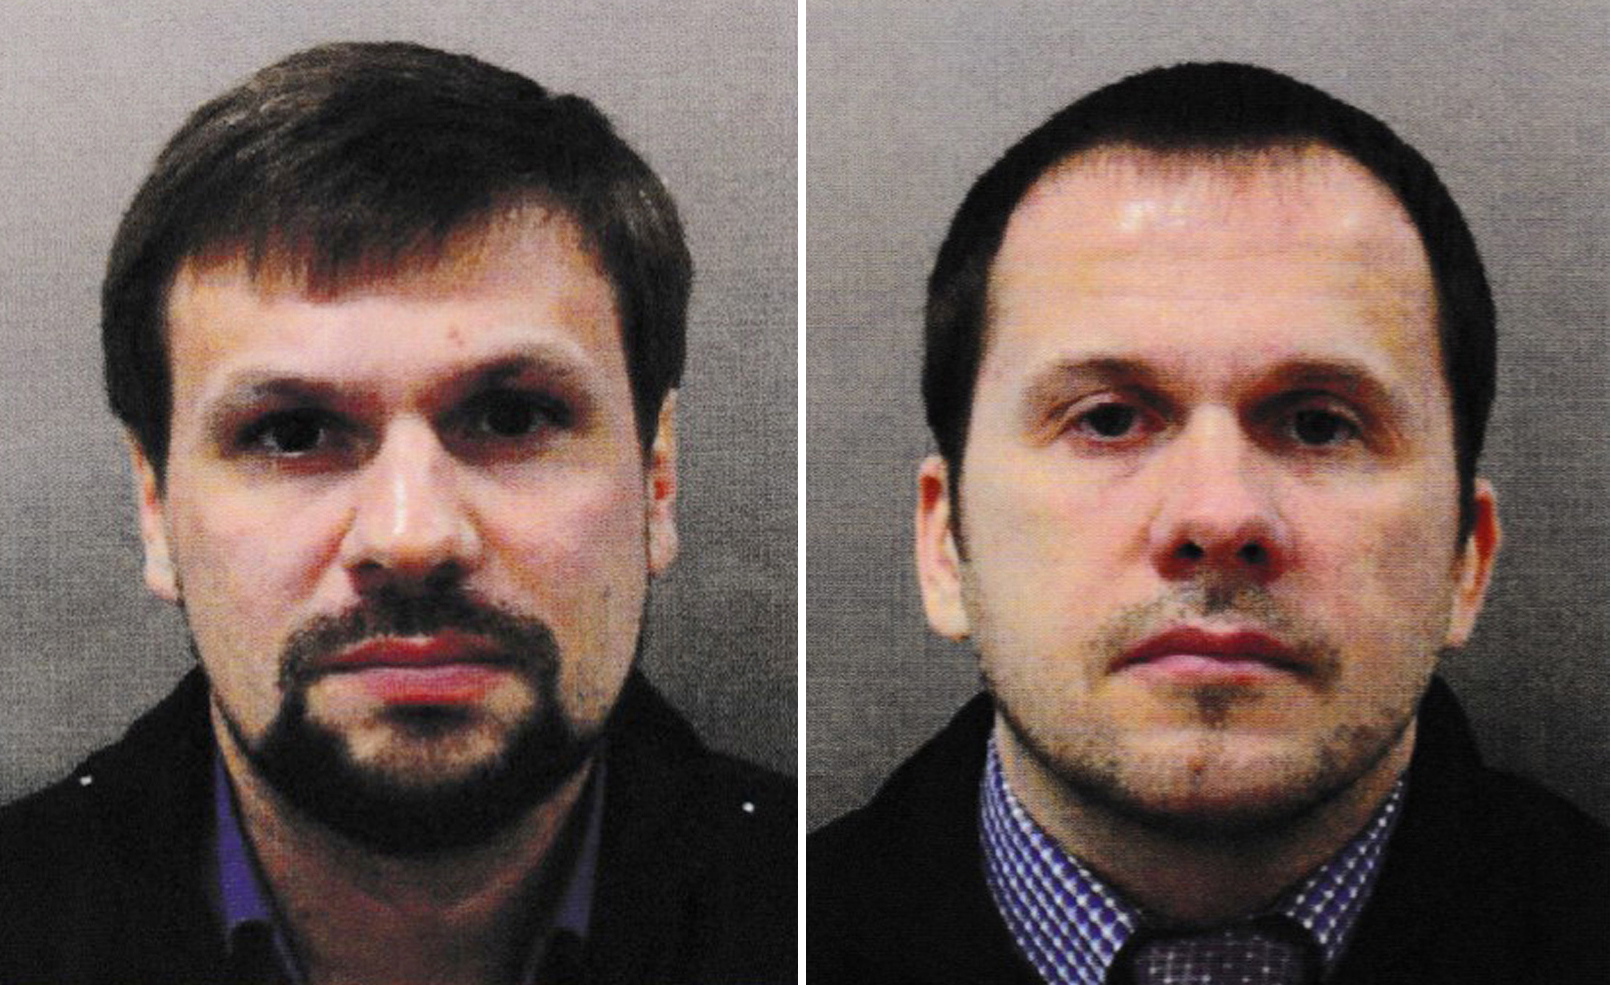 epa06998302 An undated combo handout photo made available by the British London Metropolitan Police (MPS) showing Alexander Petrov (R) and Ruslan Boshirov (L). The MPS reported on 05 September 2018 that they have charged two suspects â€“ both Russian nationals, Alexander Petrov and Ruslan Boshirov, - in relation to the attack on Sergei Skripal and his daughter Yulia who were found unconscious on a bench in Salisbury city centre southern England, on 04 March 2018, after being poisoned by a Novichok nerve agent. The MPS state that, 'We now have sufficient evidence to bring charges in relation to the attack on Sergei and Yulia Skripal in Salisbury and domestic and European arrest warrants have been issued for the two suspects. We are also seeking to circulate Interpol Red Notices.'  EPA/LONDON METROPOLITAN POLICE / HANDOUT  HANDOUT EDITORIAL USE ONLY/NO SALES